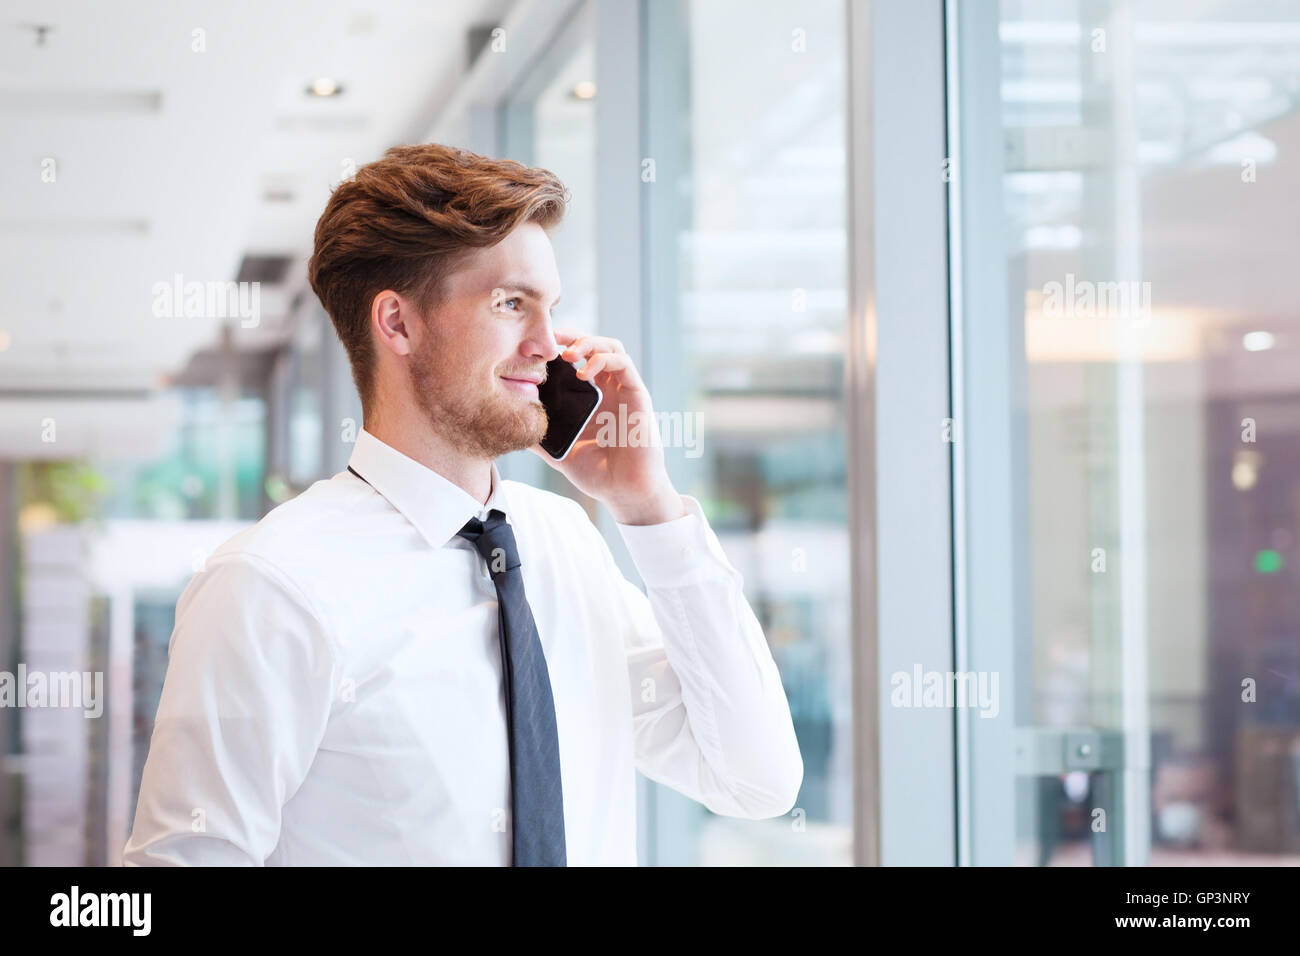 Businessman talking on phone and smiling Banque D'Images